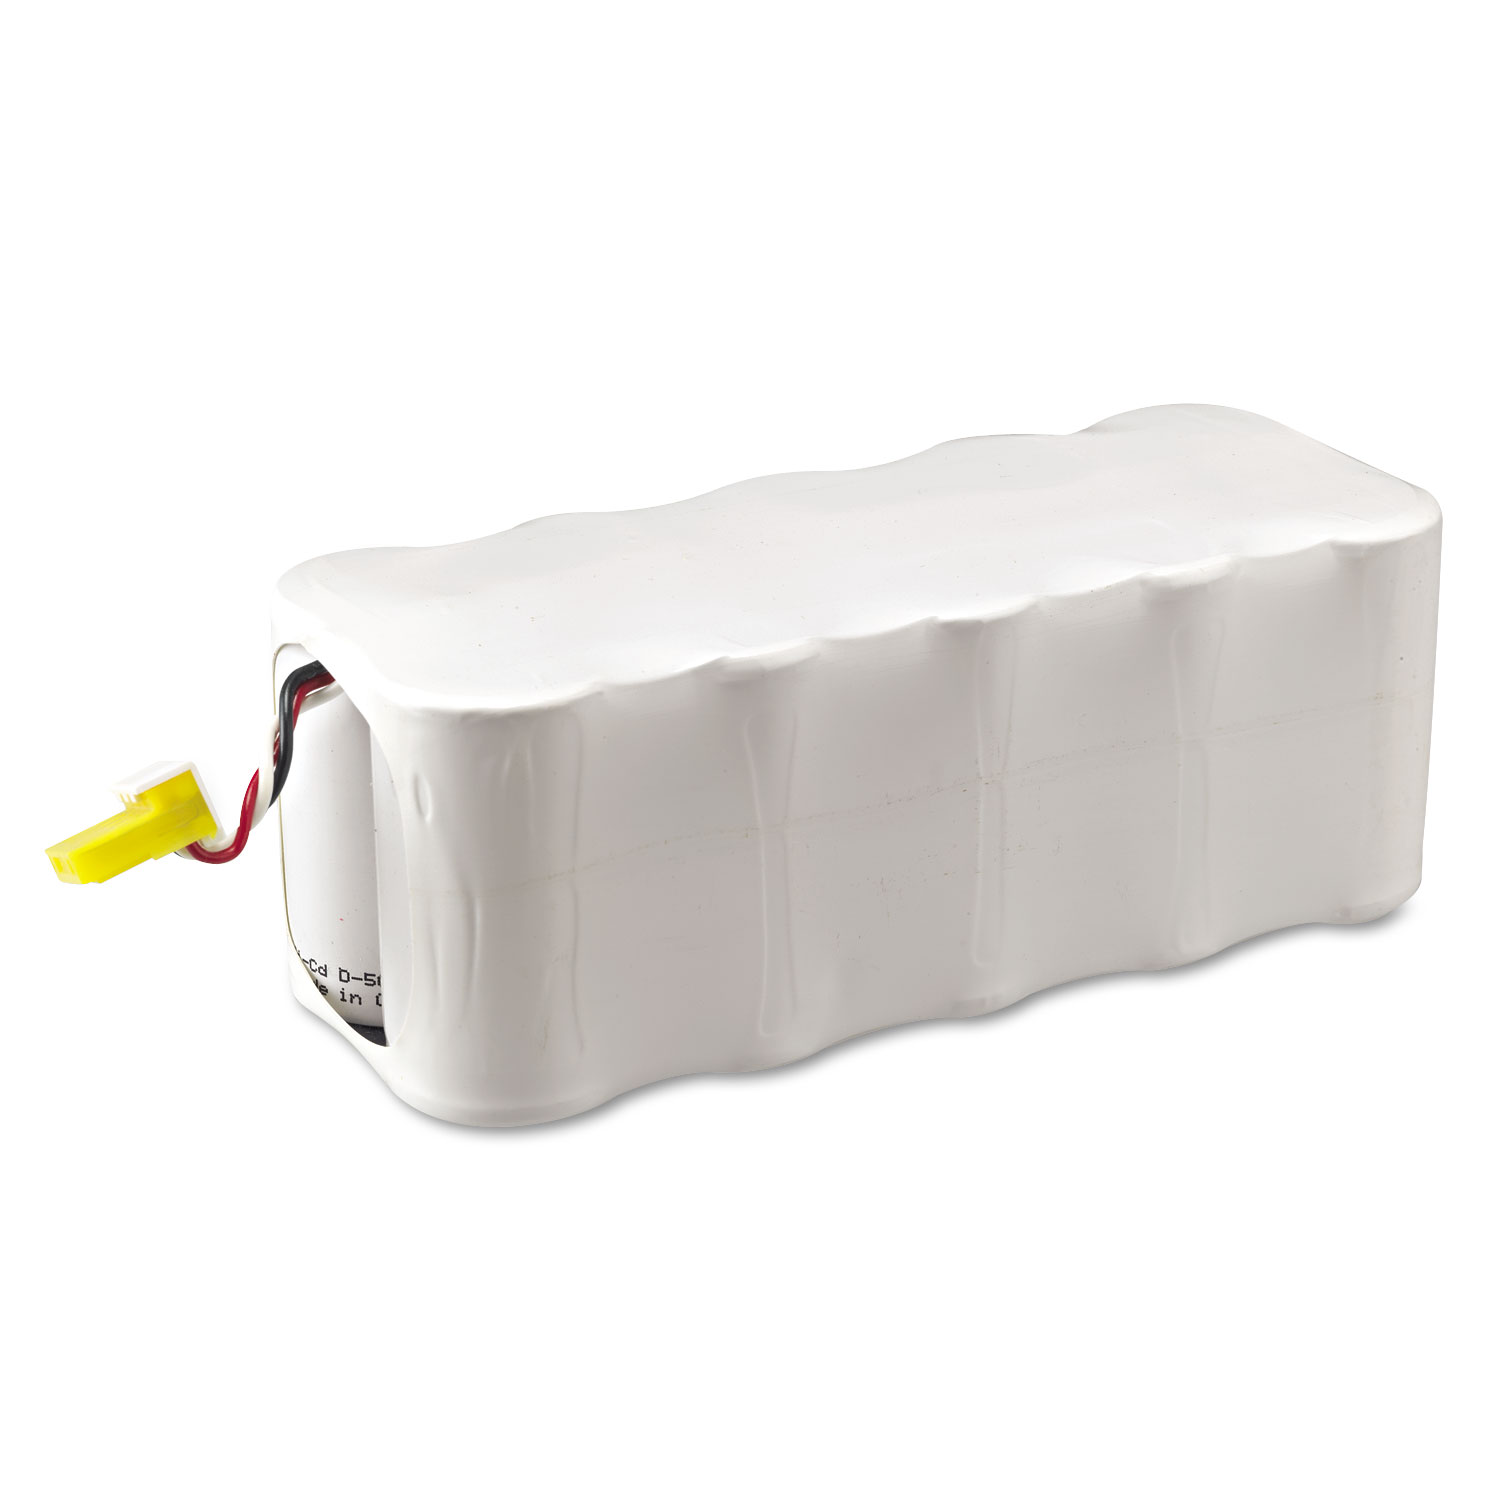 Rechargeable NiCad Battery Pack, Requires AC Adapter/Battery Recharger